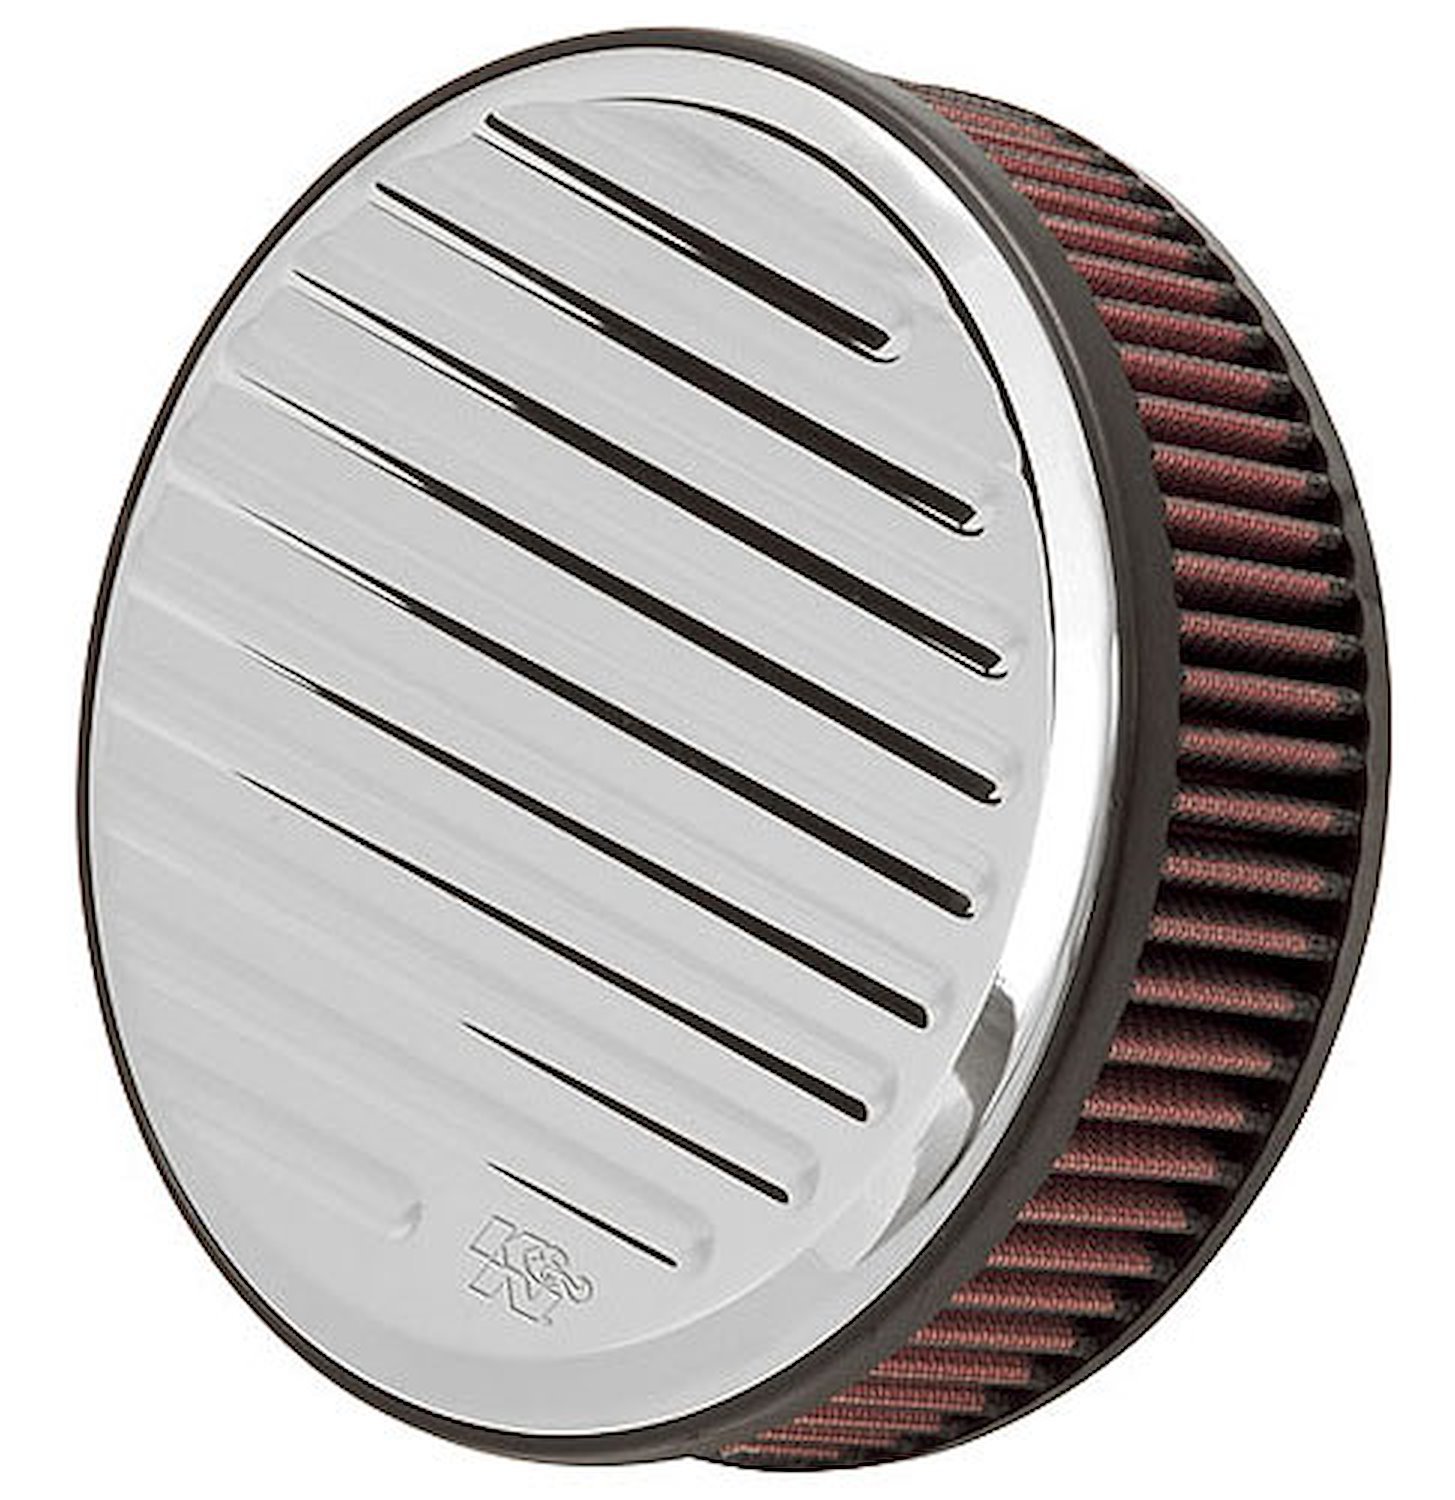 High-Performance Replacement Air Filter 1992-1997 Harley Davidson Electra Glide/Softail/Fat Boy/Glide/Road King